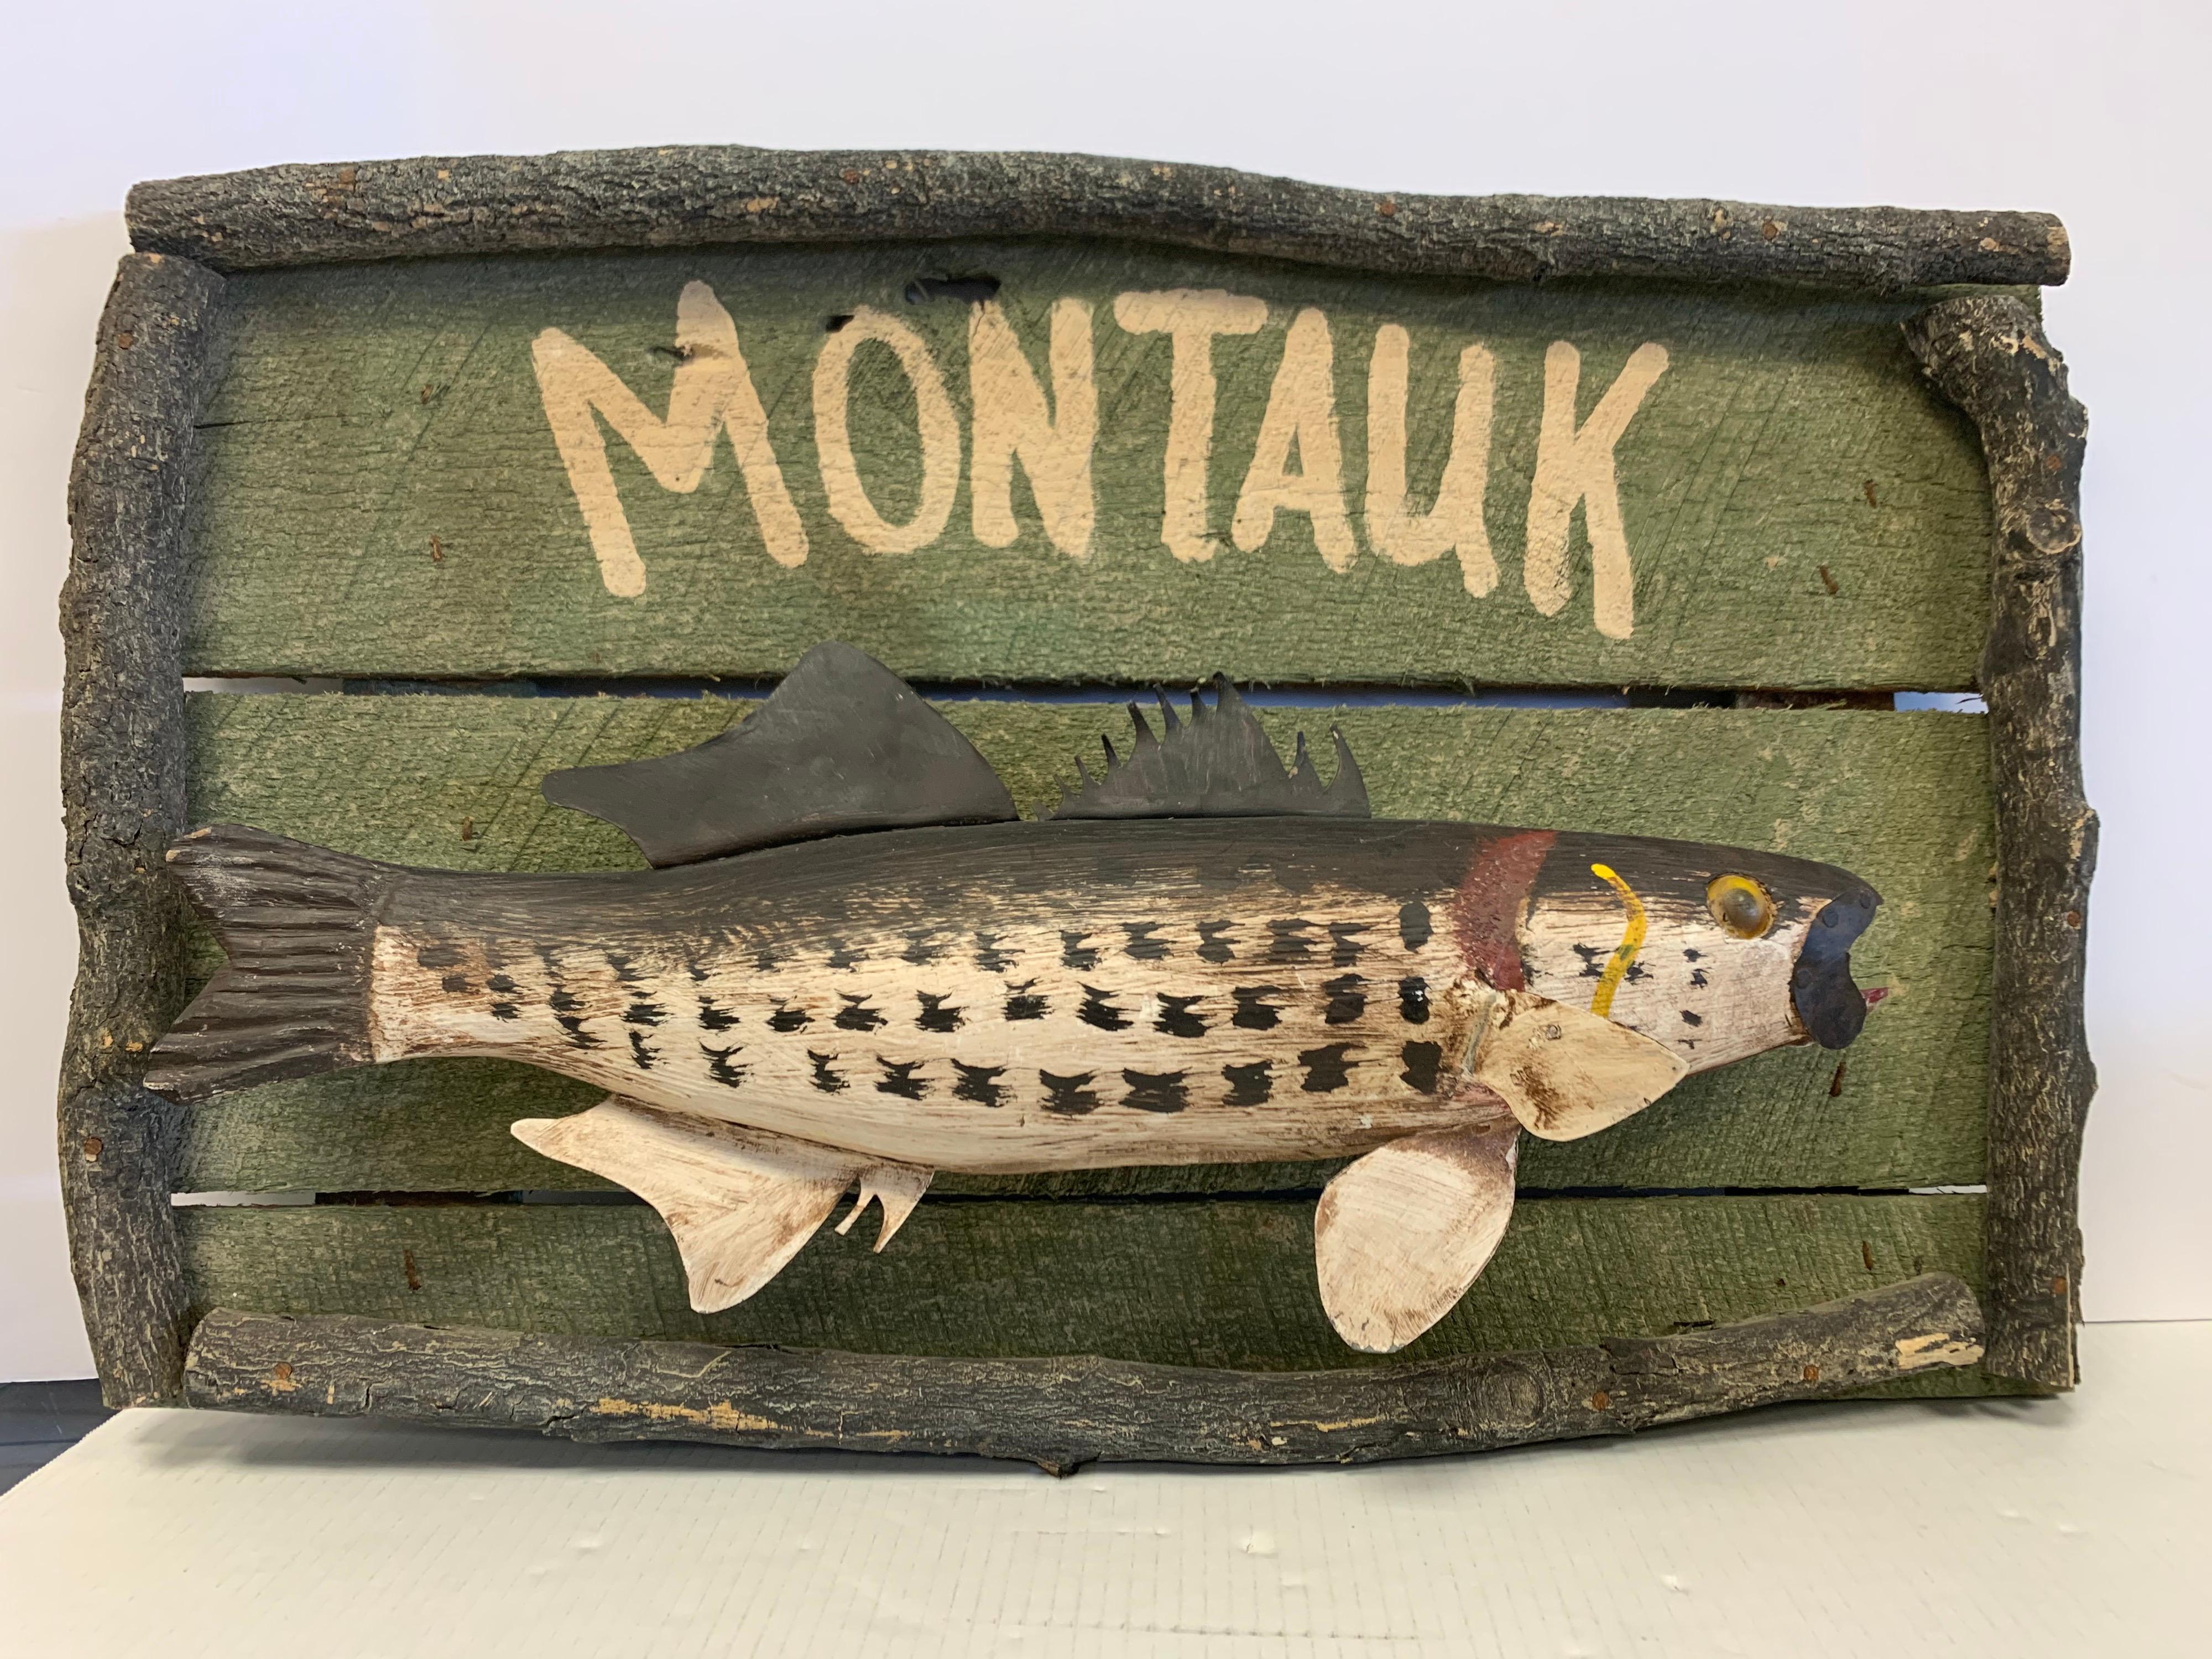 Vintage, one-of-a-kind folk art painted Montauk sign of a three dimensional carved fish mounted on wood. Framed with tree branches all around.  